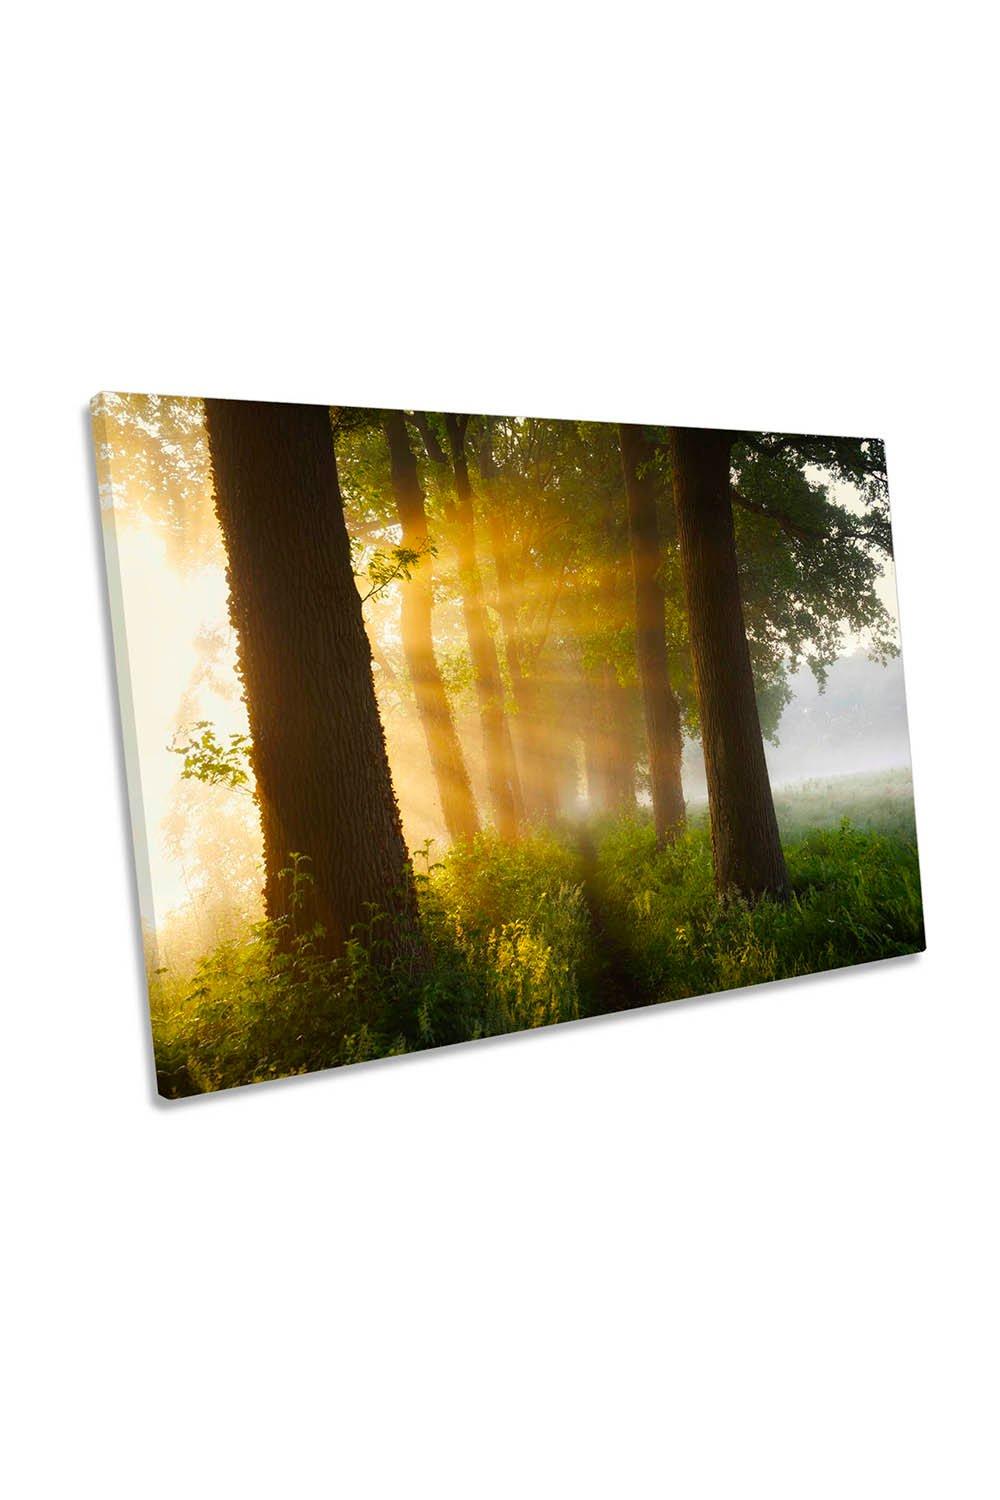 First Day or Summer Sunlight Landscape Canvas Wall Art Picture Print